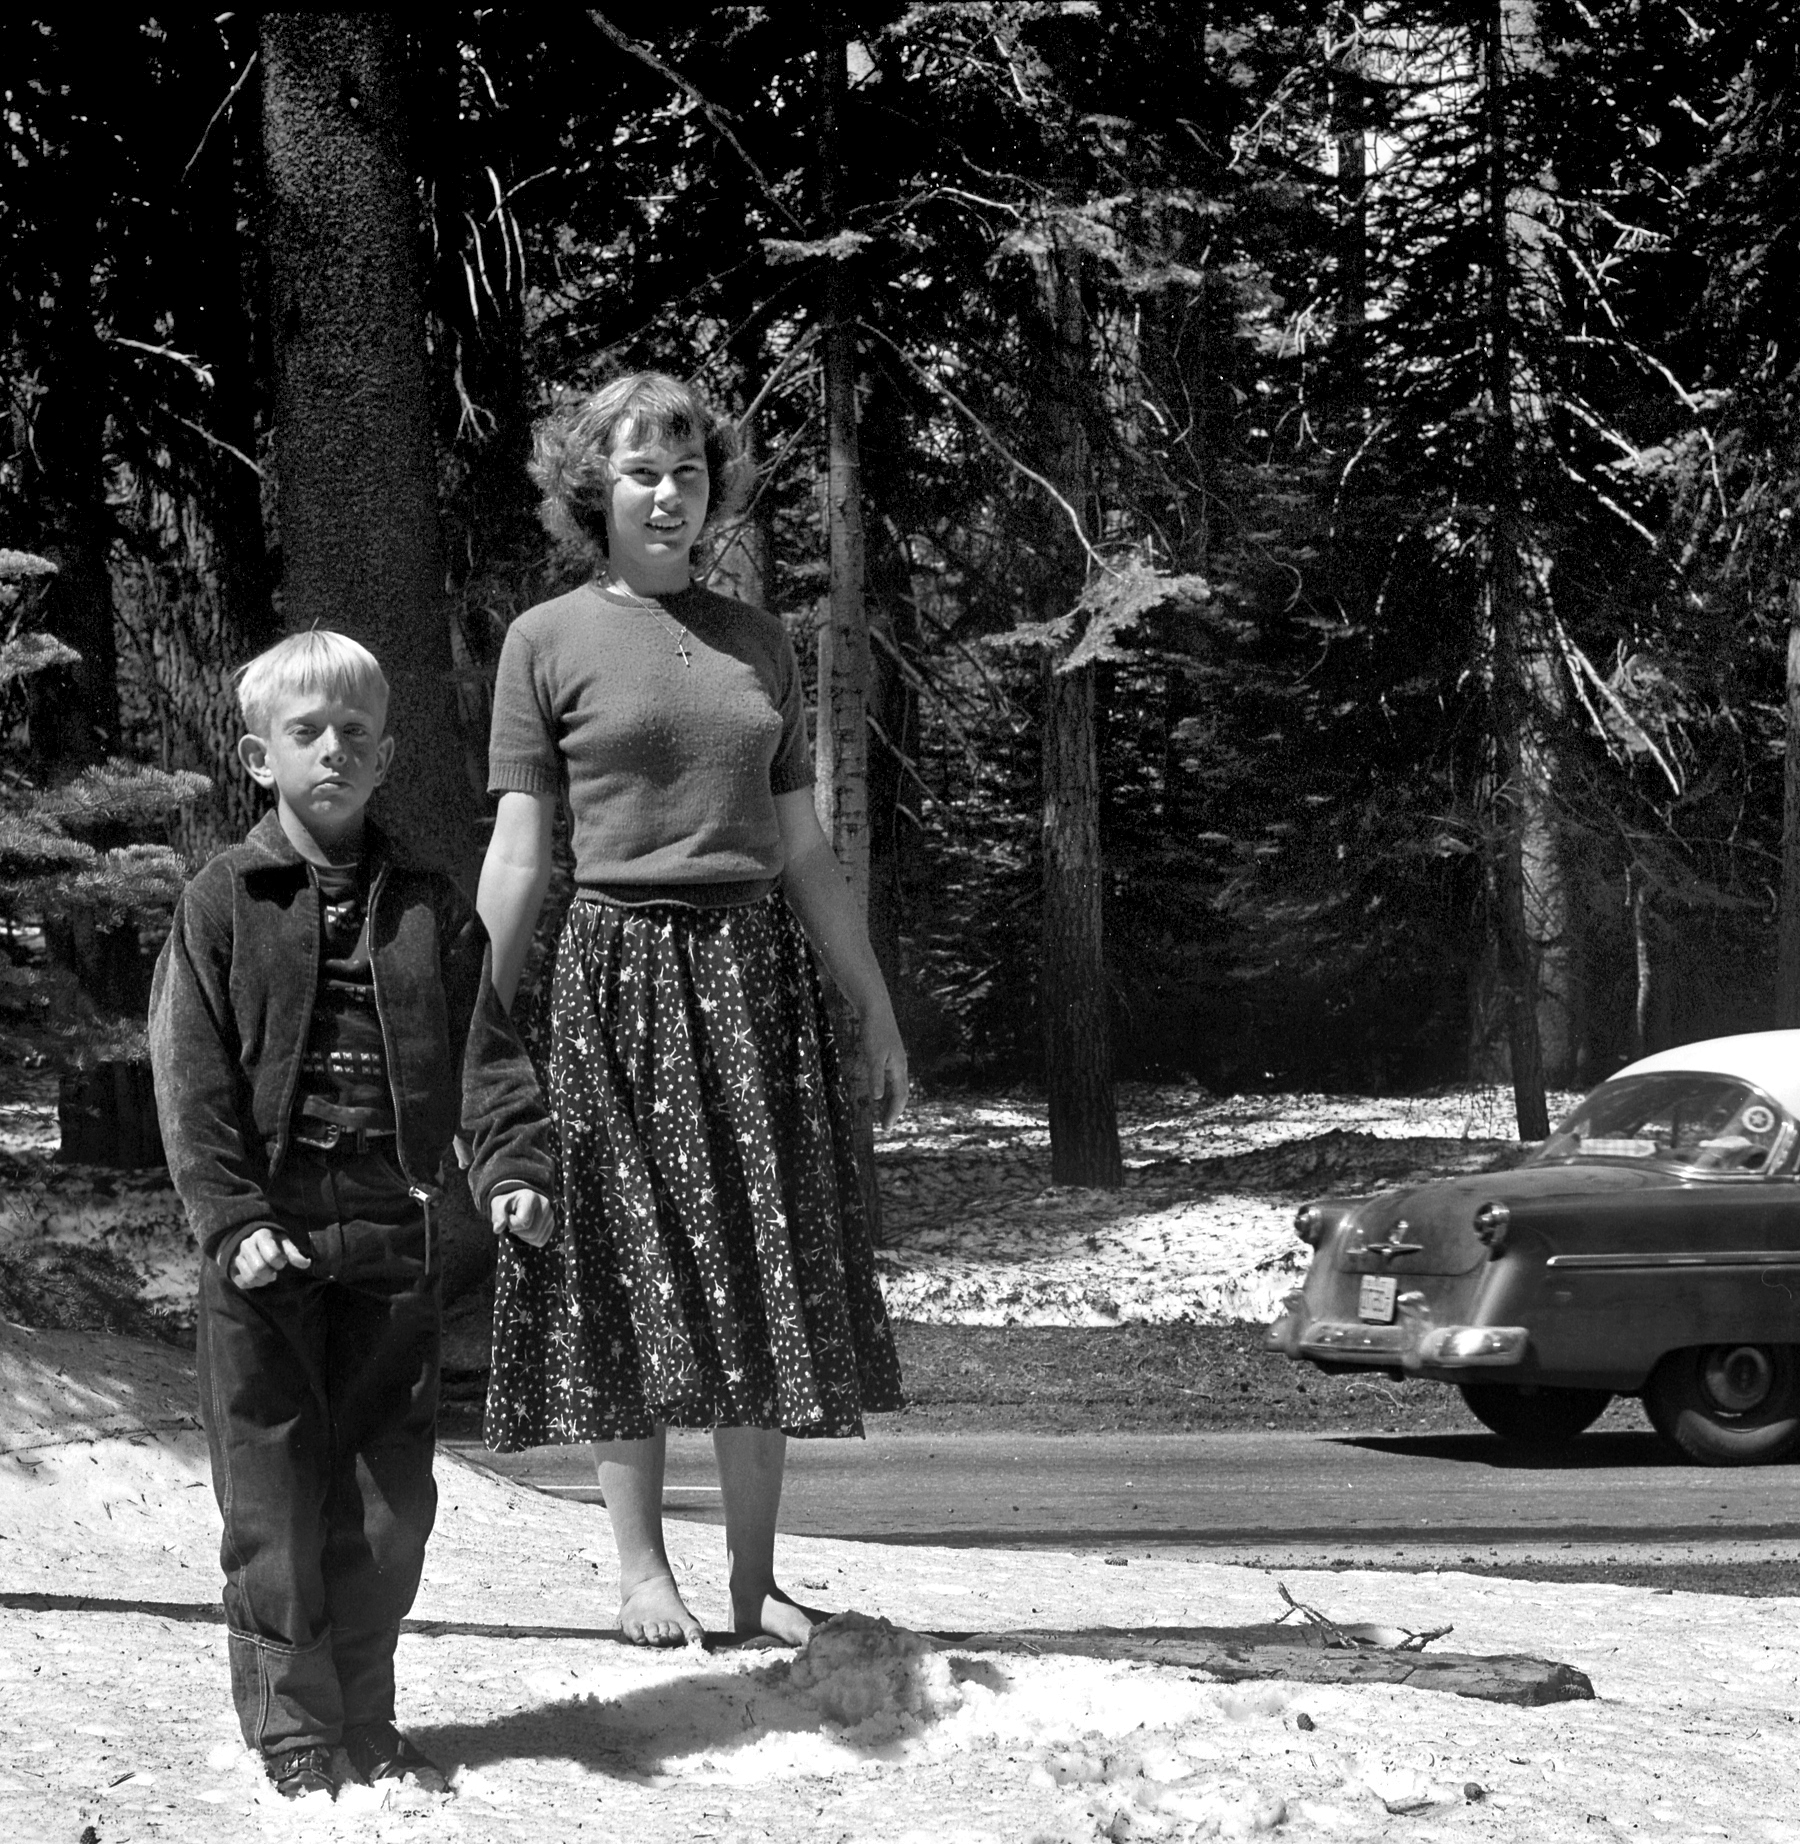 Here we see our two companions yet again, albeit one of them with an odd choice of footwear (or lack thereof). tterrace says the car is a 1954 Ford. View full size